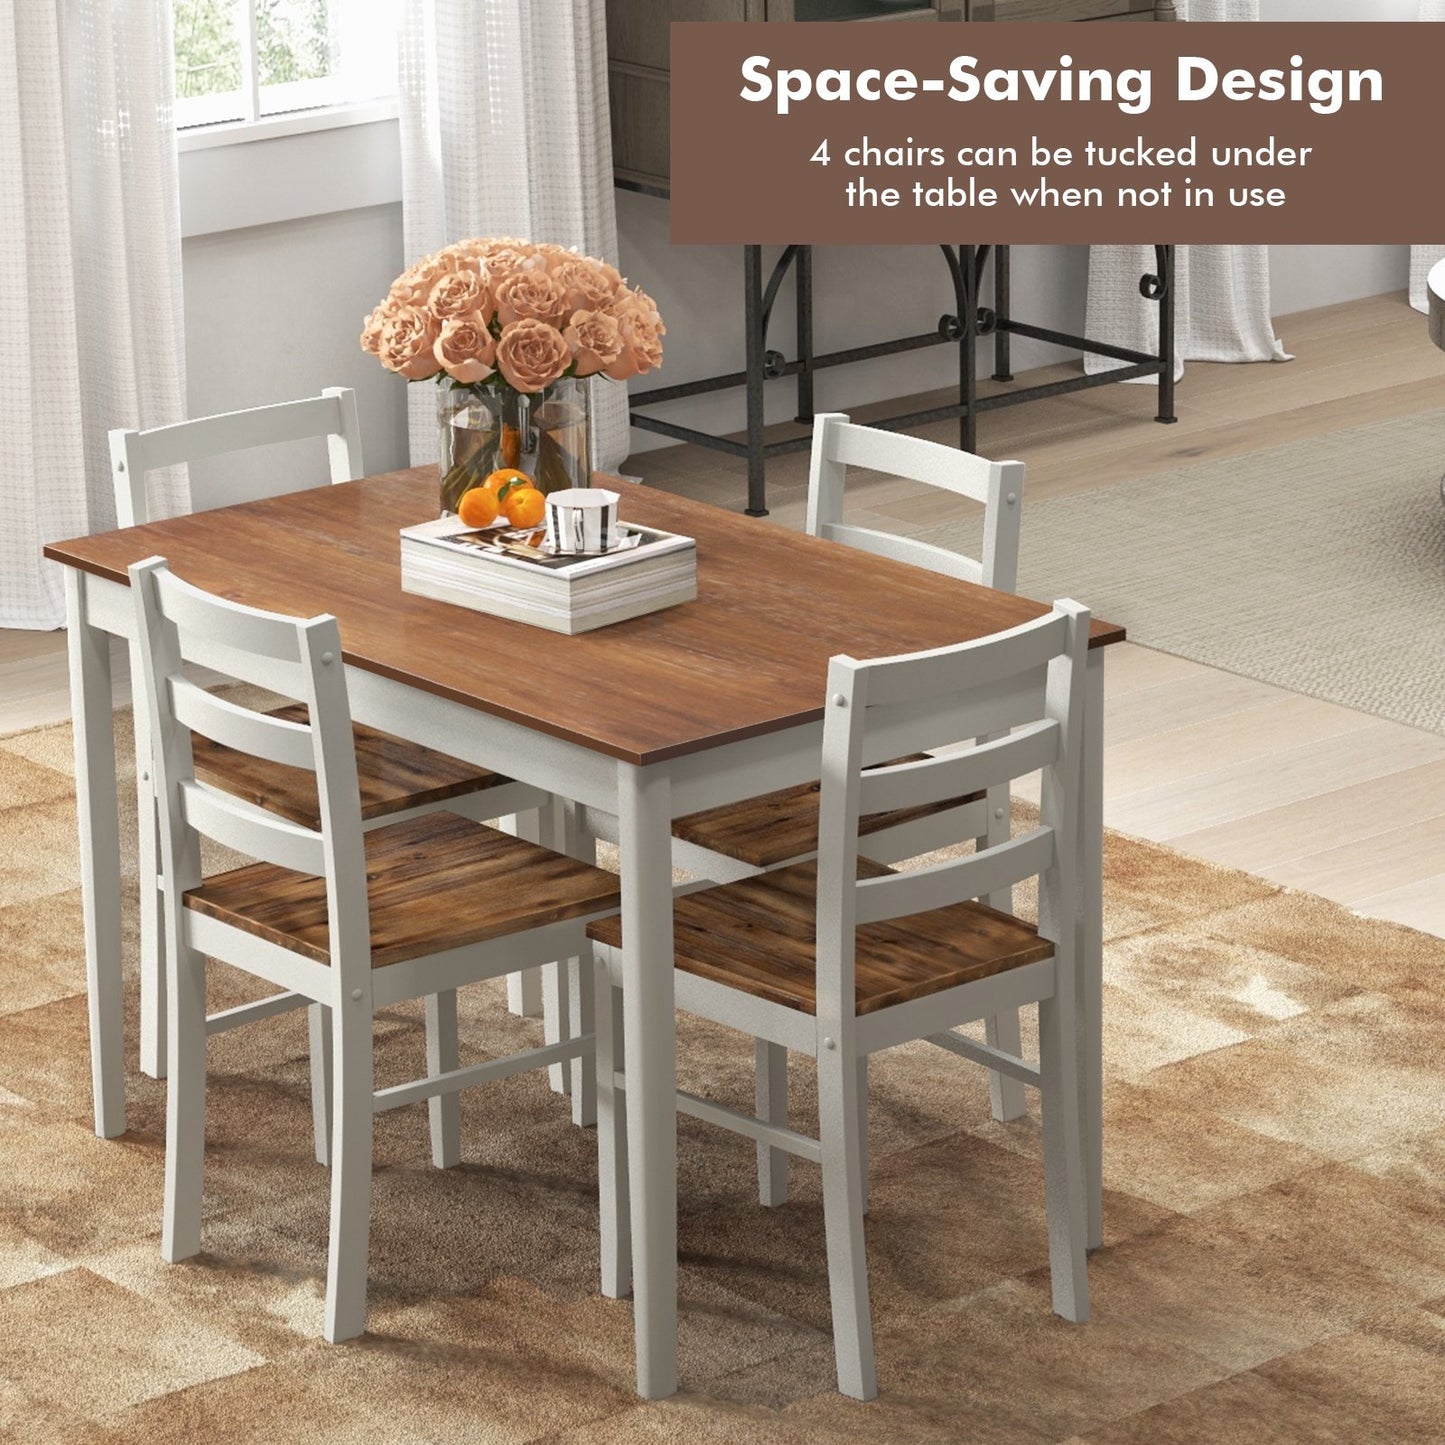 5-Piece Wooden Dining Set with Rectangular Table and 4 Chairs-Coffee and White, Coffee